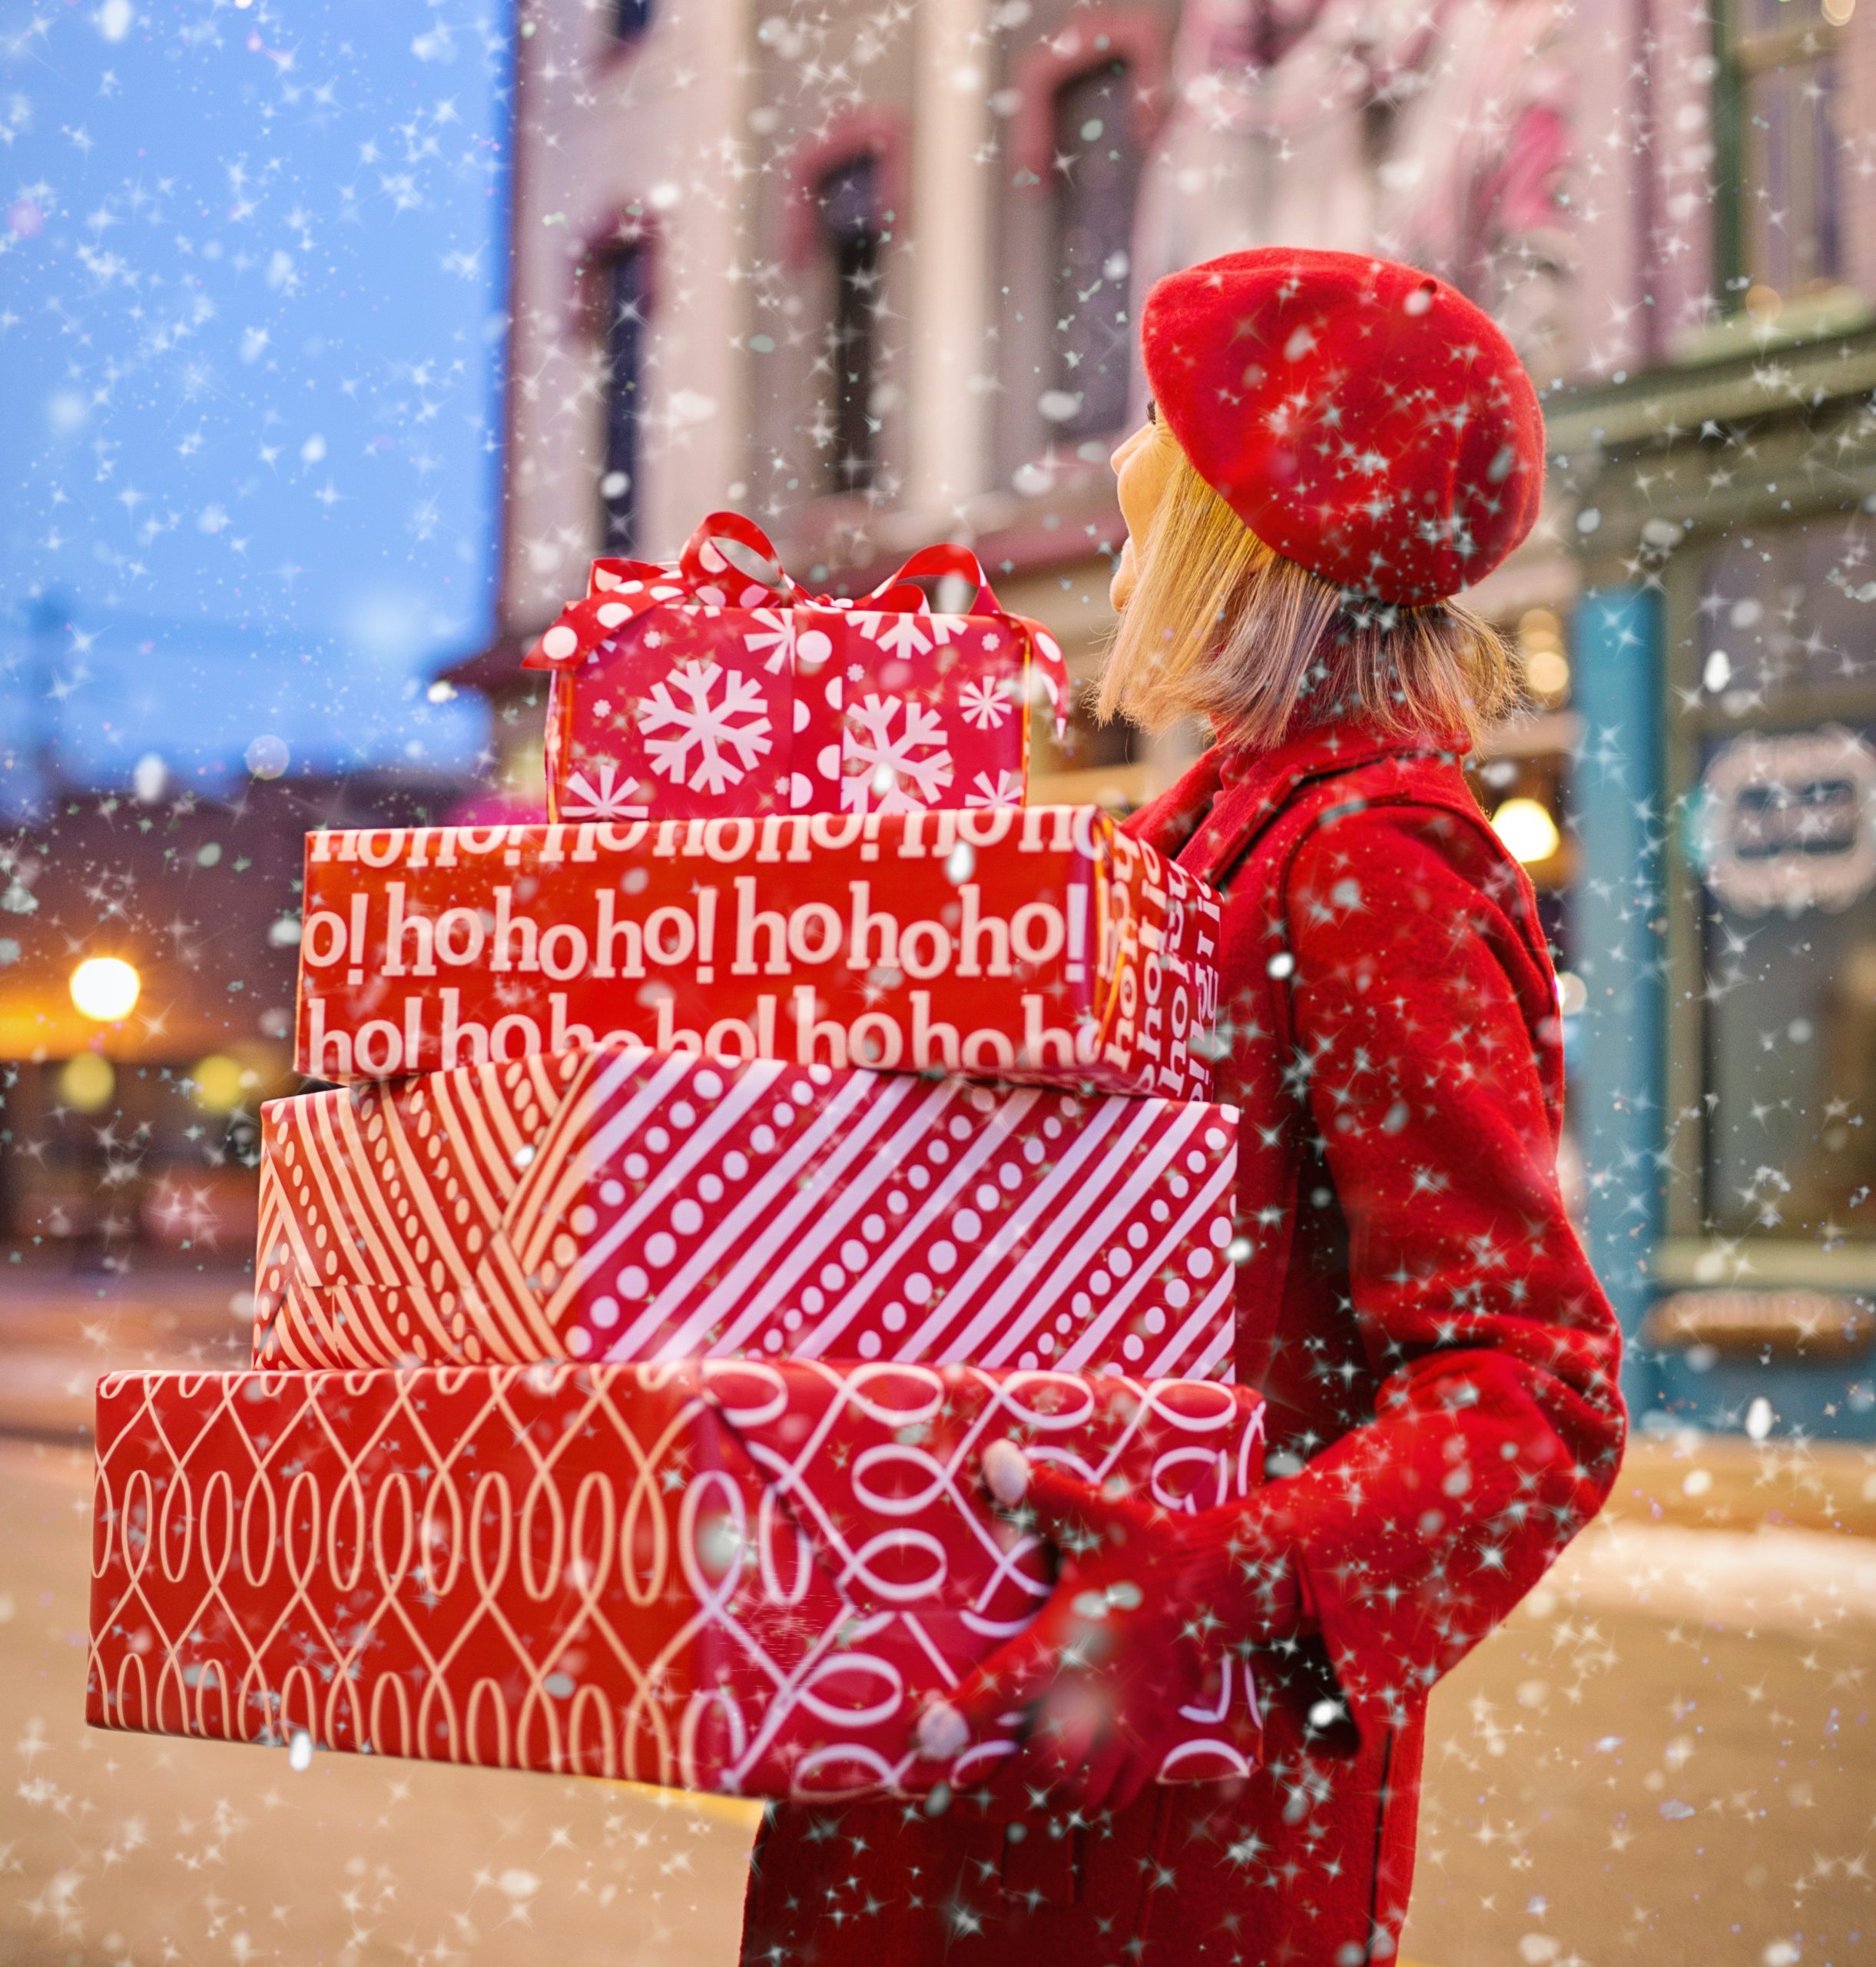 Woman stands in snow while holding three red Christmas-wrapped boxes.